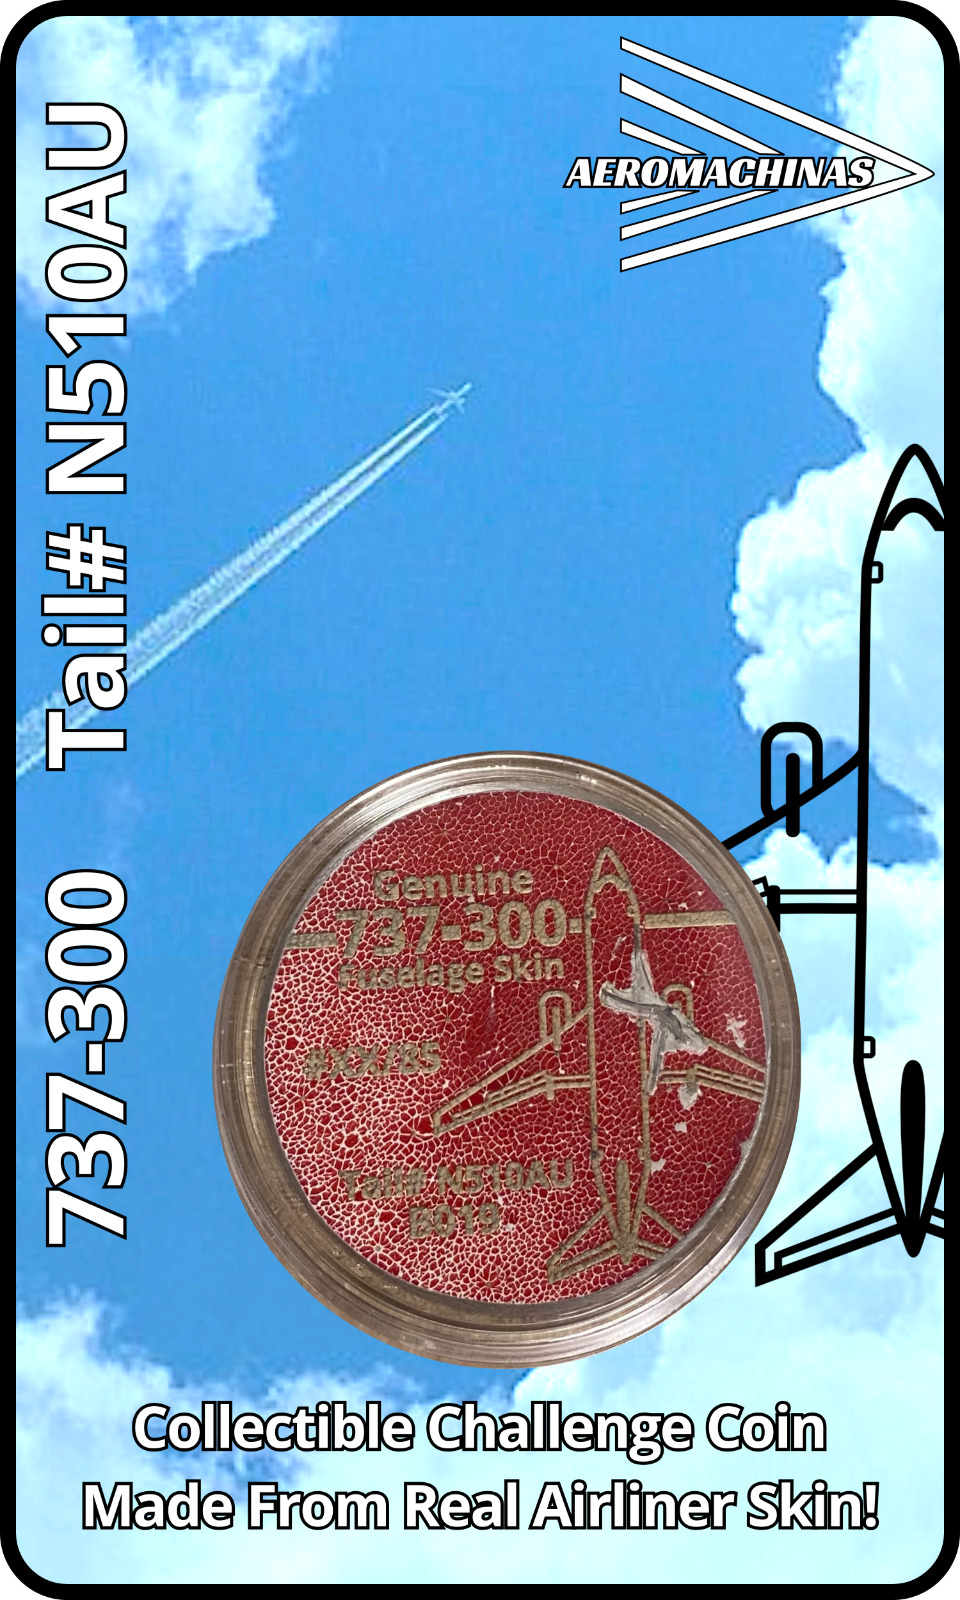 Blue and Red Boeing 737 Aircraft Skin Challenge Coin